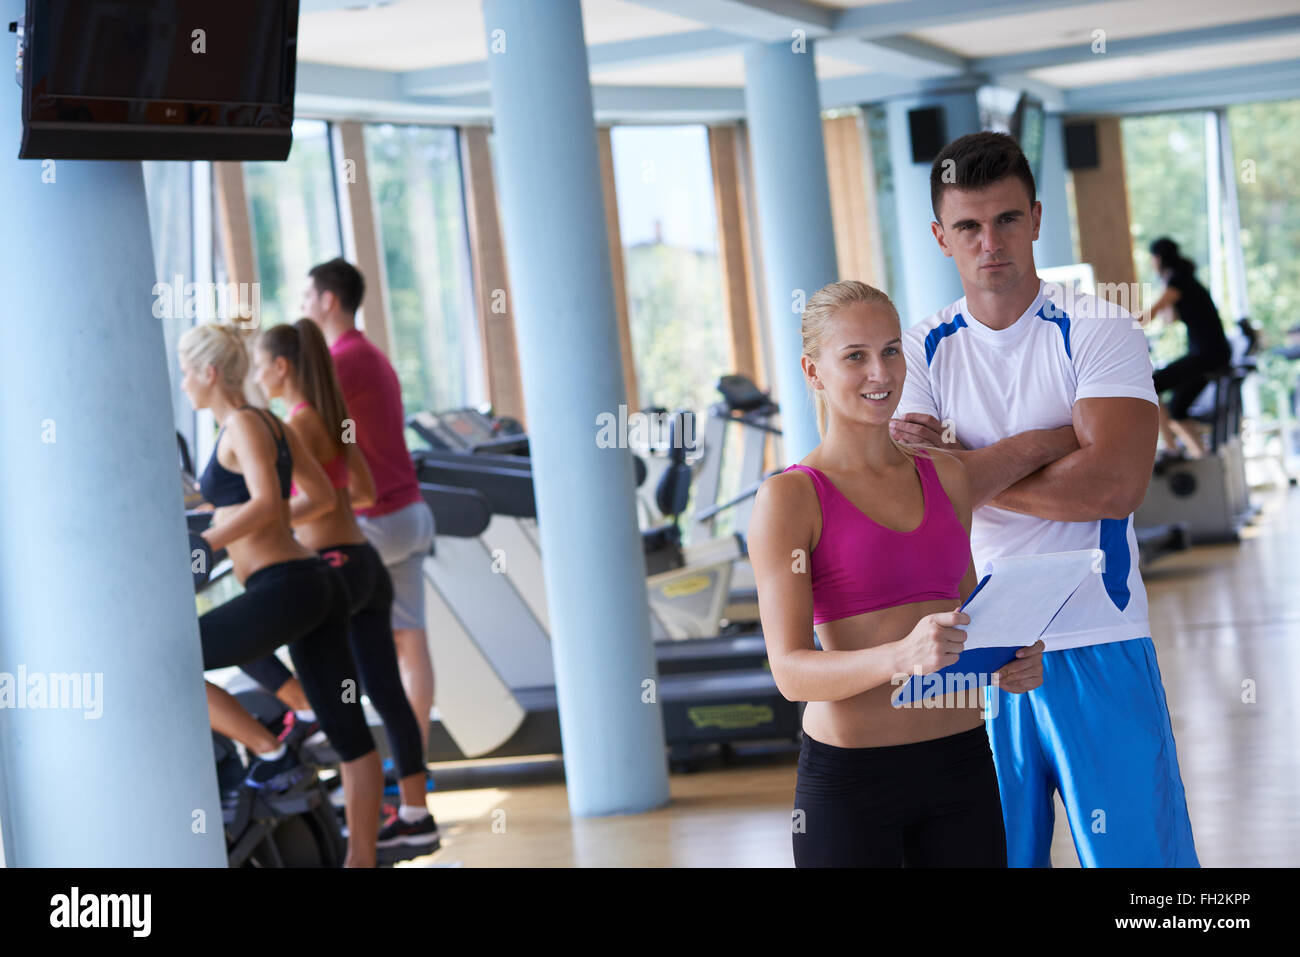 people group in fitness gym Stock Photo